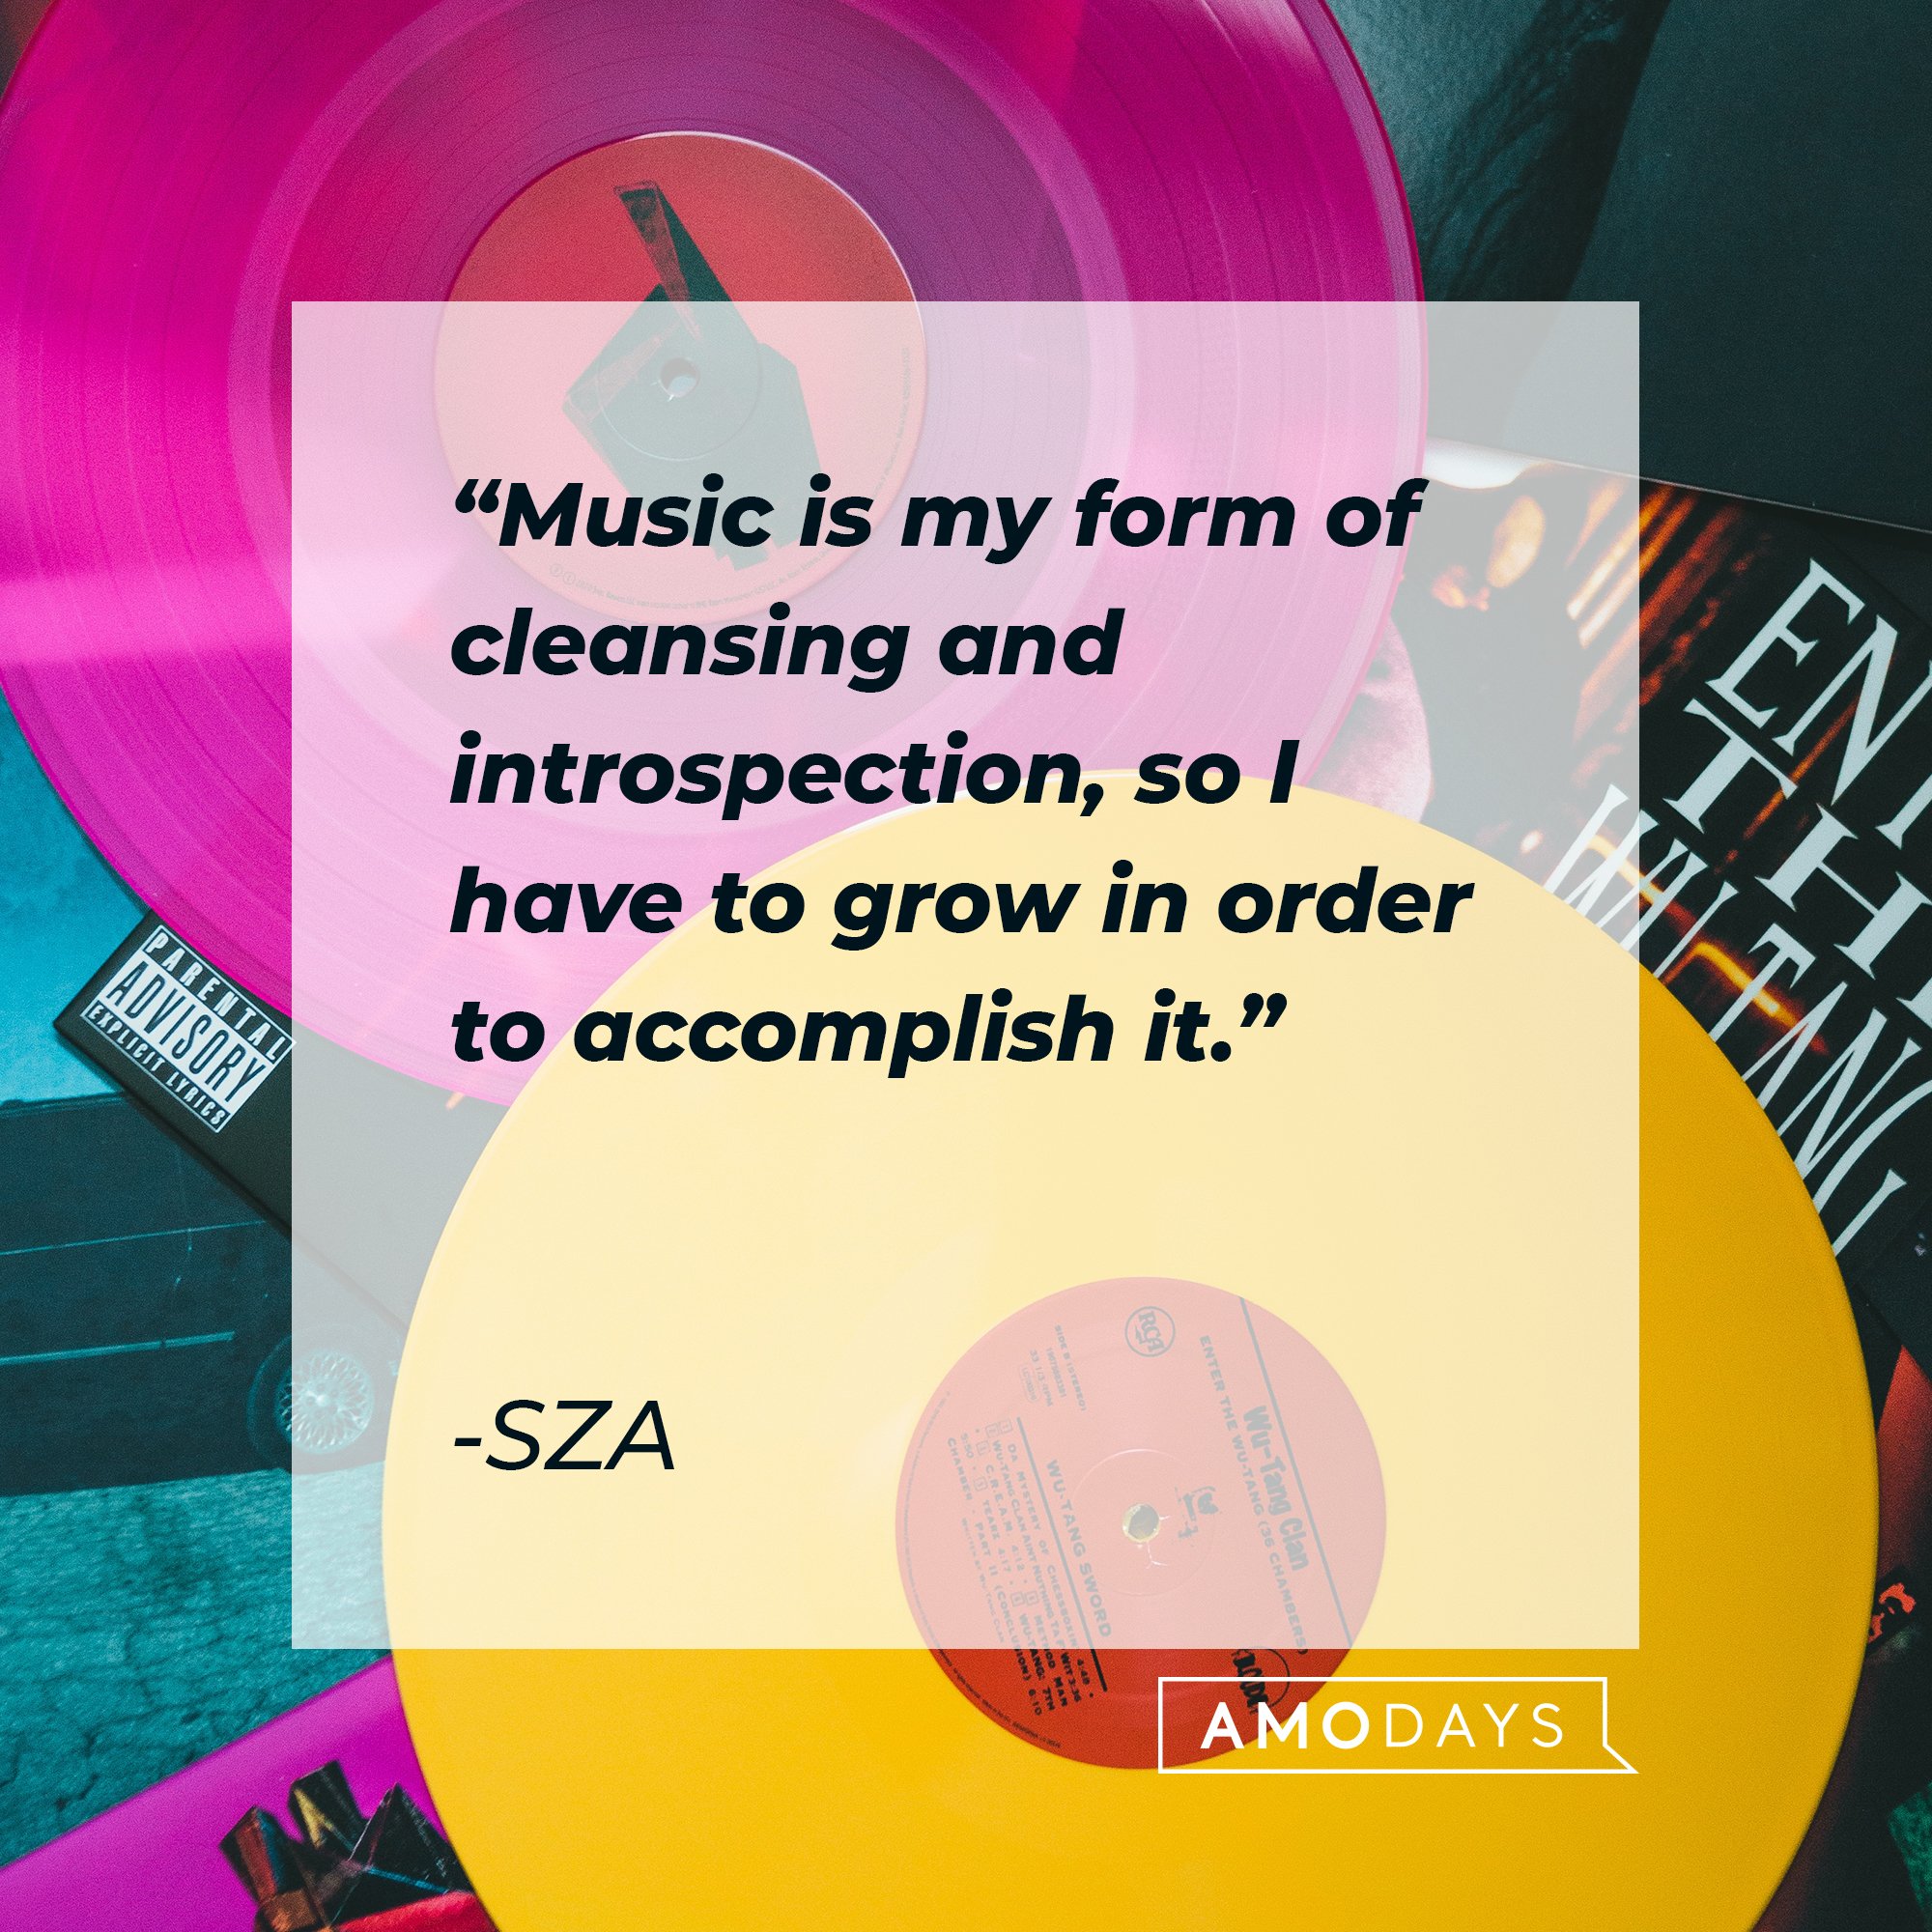 SZA's quote: "Music is my form of cleansing and introspection, so I have to grow in order to accomplish it." | Image: AmoDays